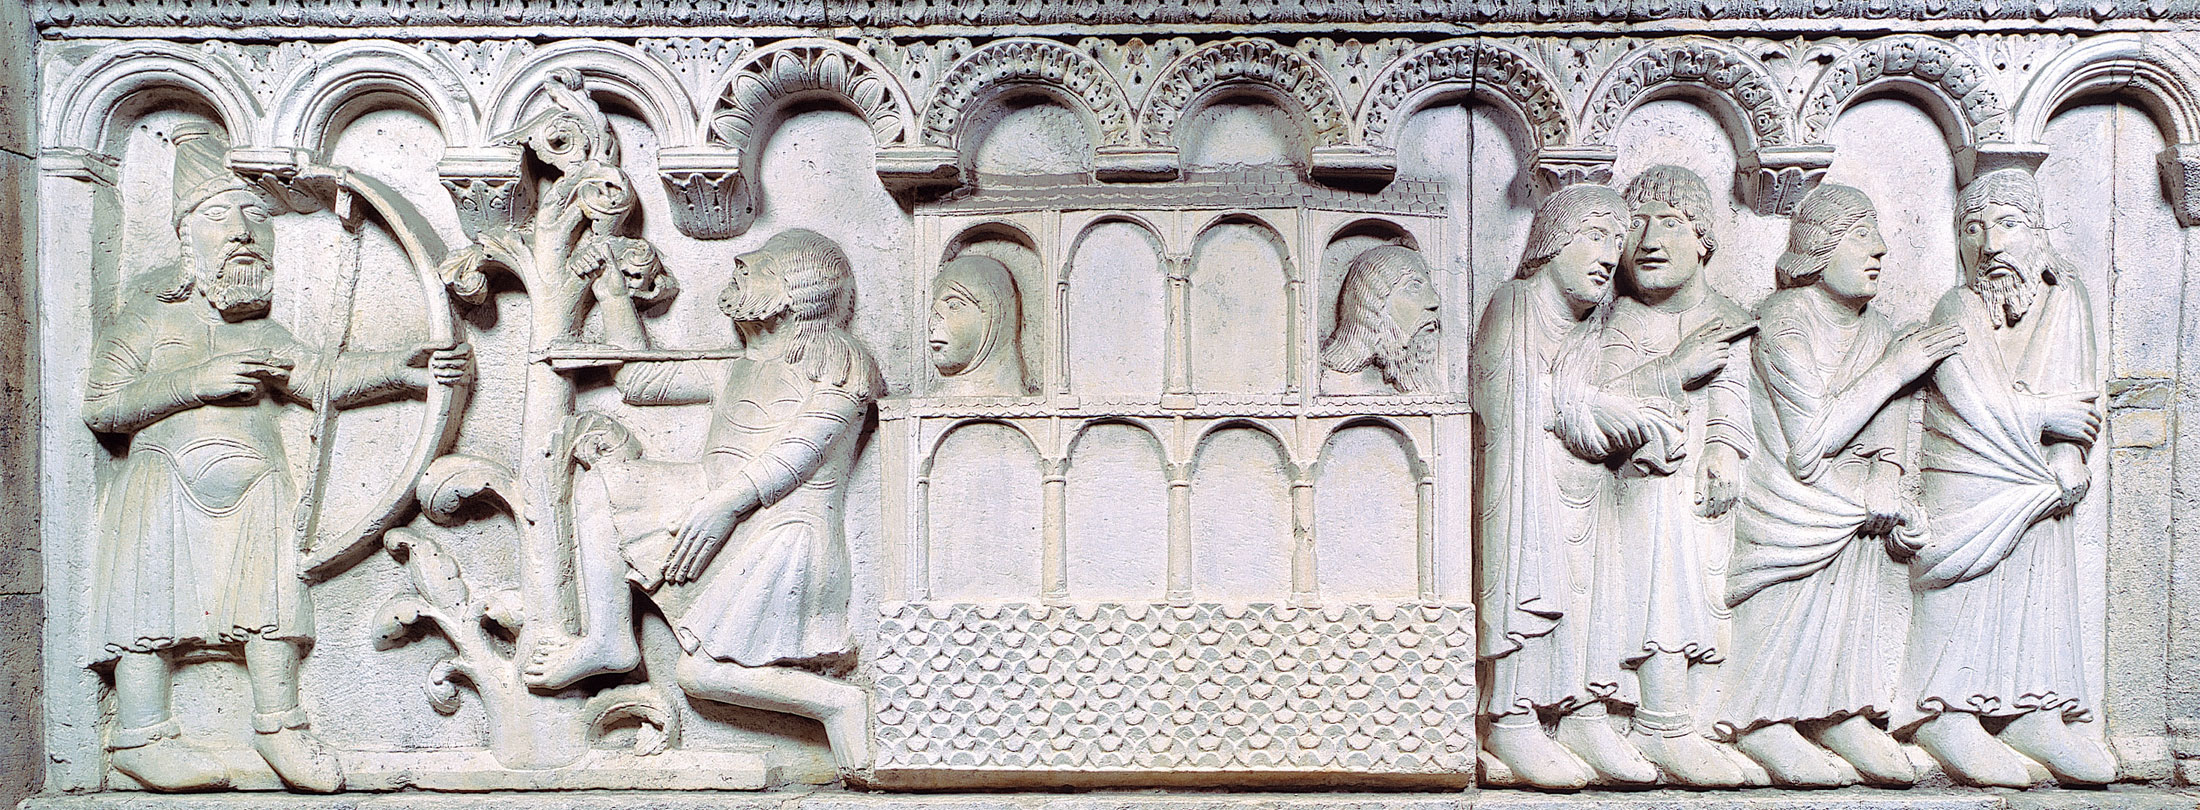 Wiligelmo, Stories from Genesis: the slaying of Cain, Noah's ark, and the exit of Noah and his sons from the ark (c. 1099-1110; Vicenza soft stone; Modena, Duomo). Photo: Museums of the Cathedral of Modena